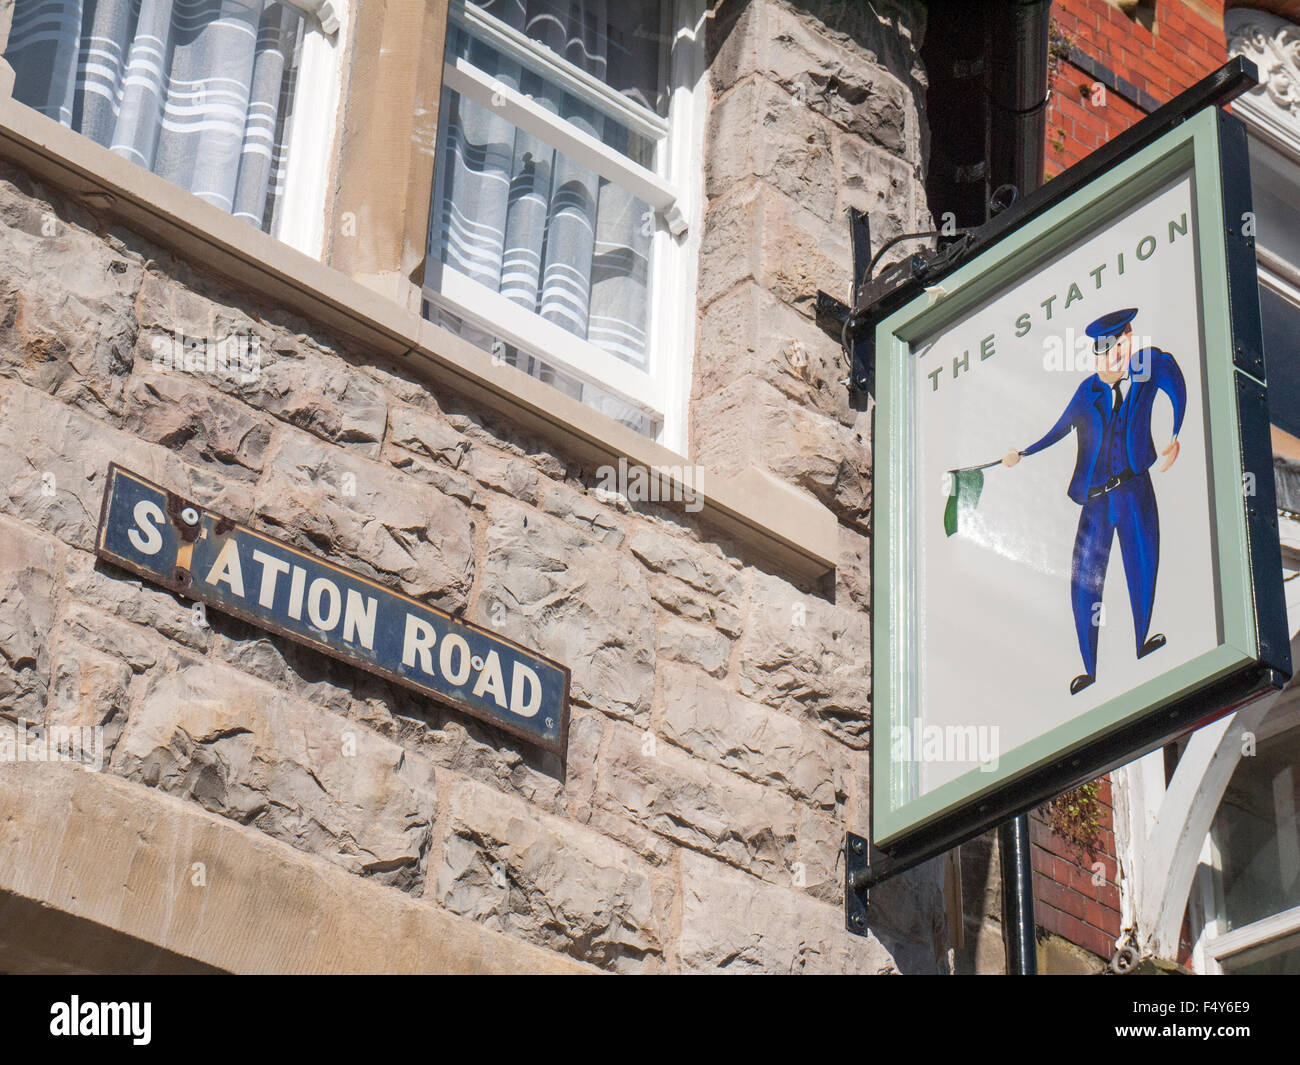 The Station pub sign in on Station Road in Colwyn Bay Wales UK Stock Photo